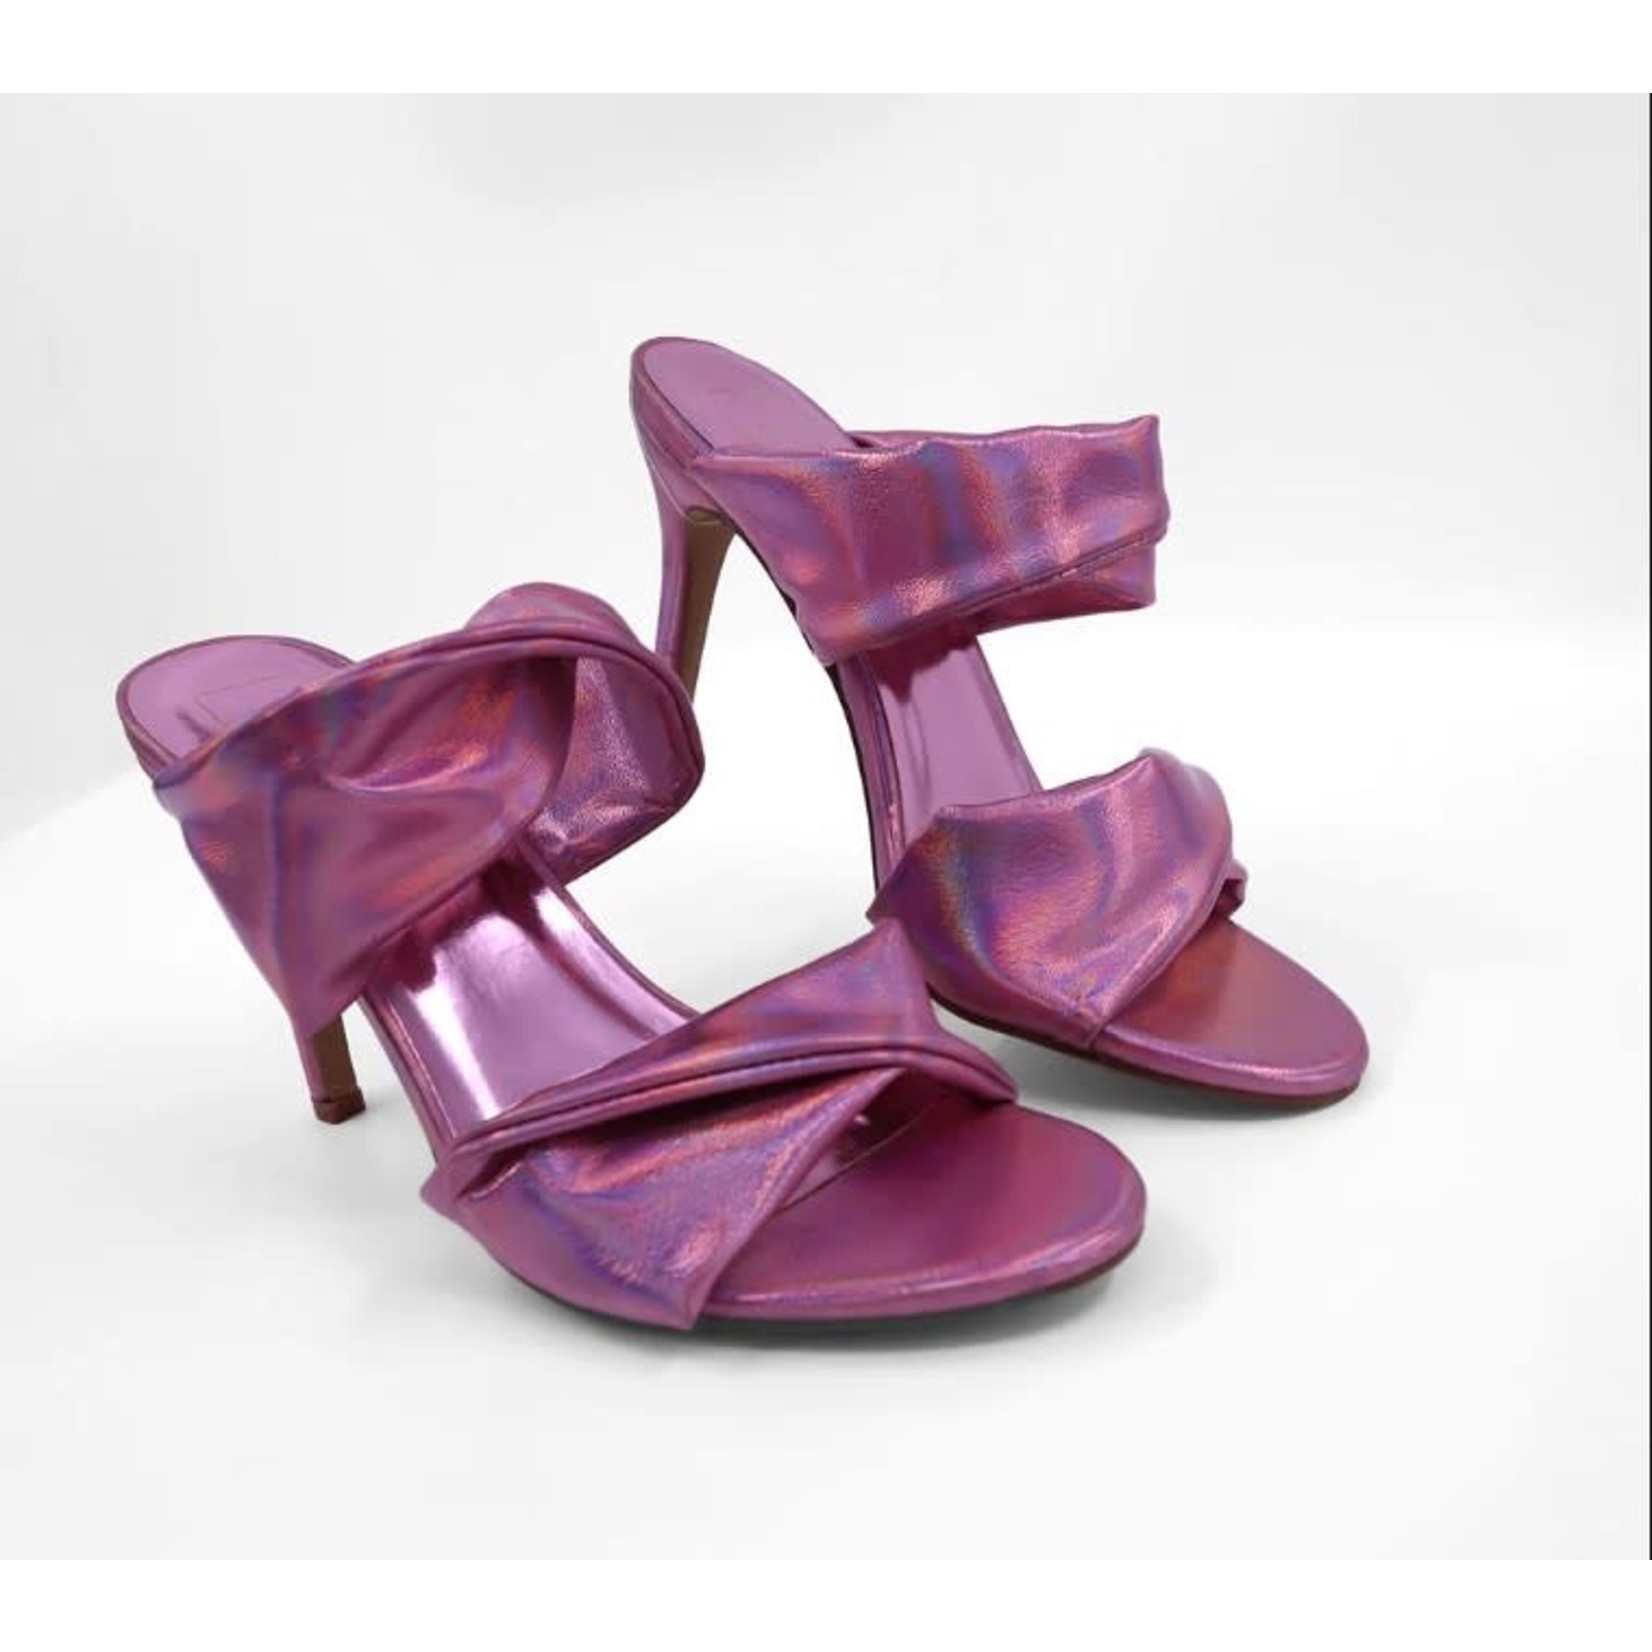 Therapy Shoes Kaylee Pink Metallic | Women's Heels | Sandals | Mules